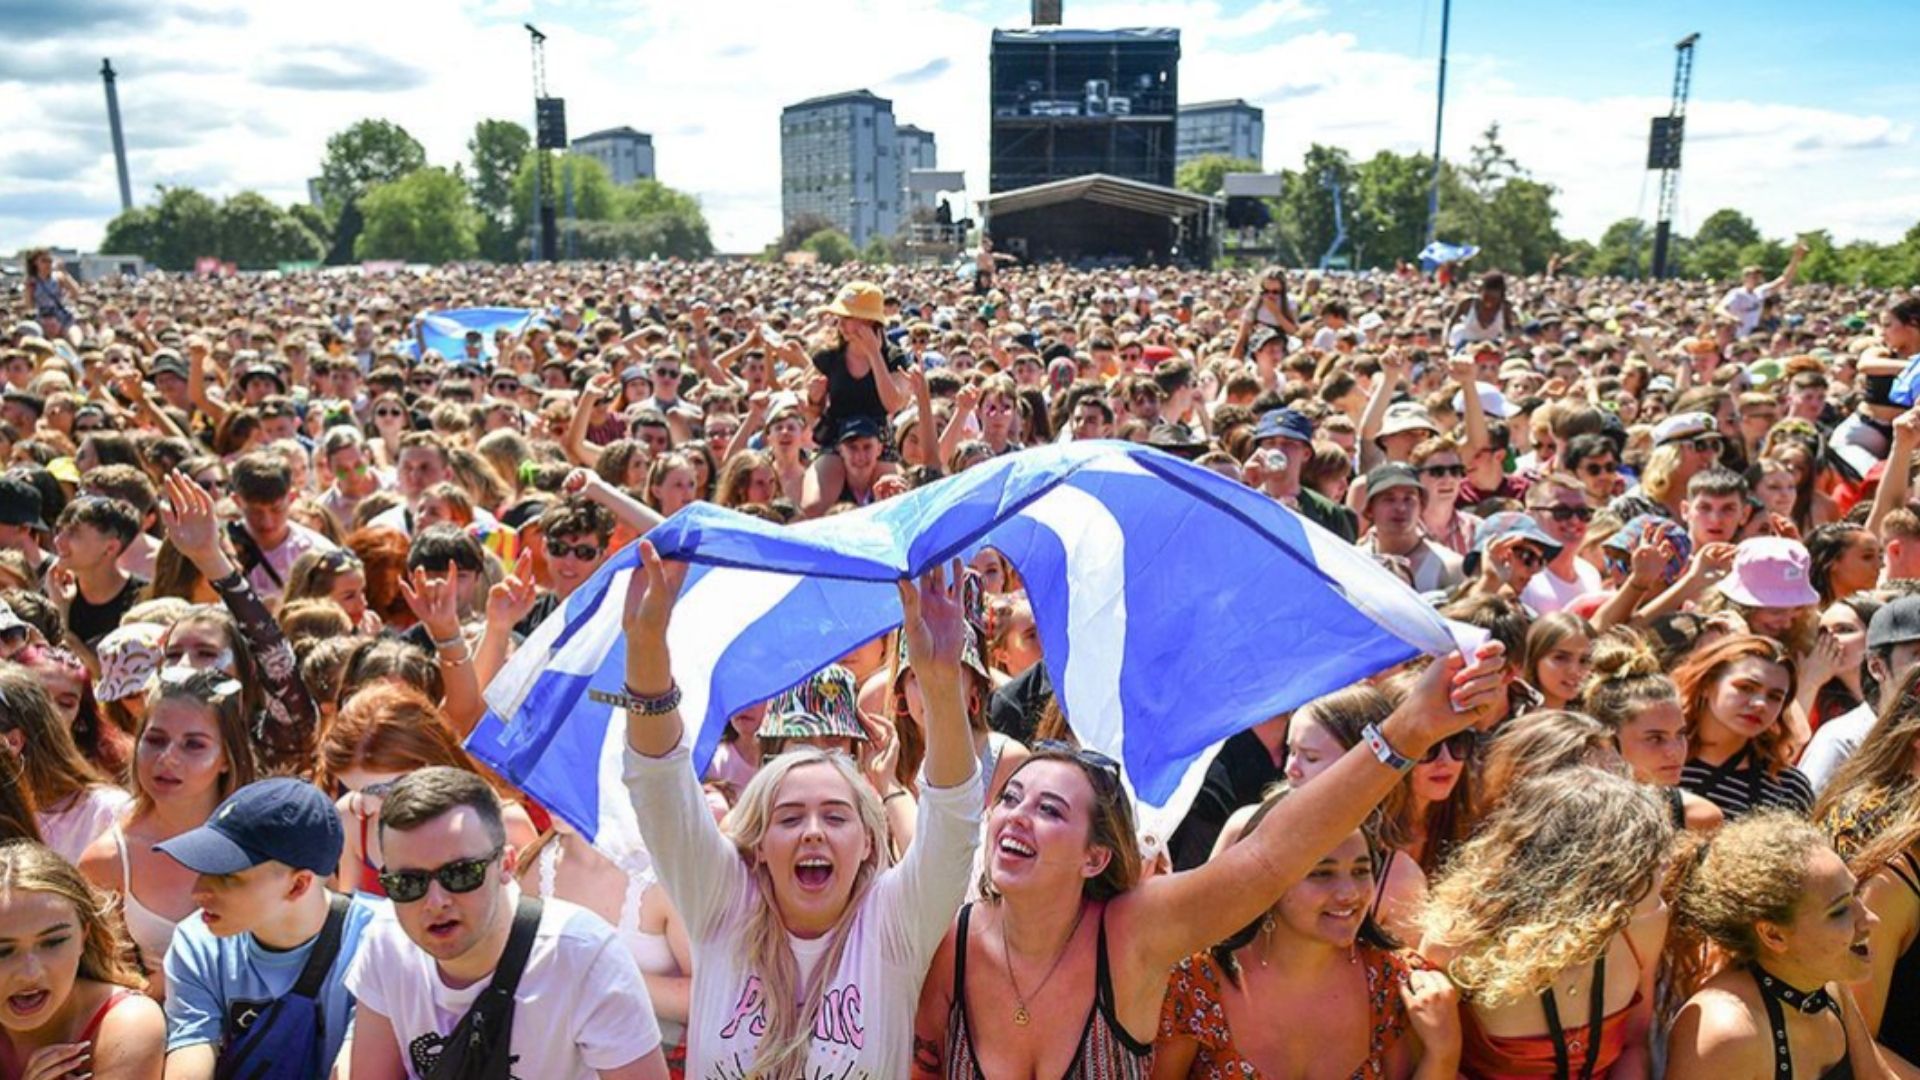 Festival participants confronting transport chaos as thousands travel to TRNSMT